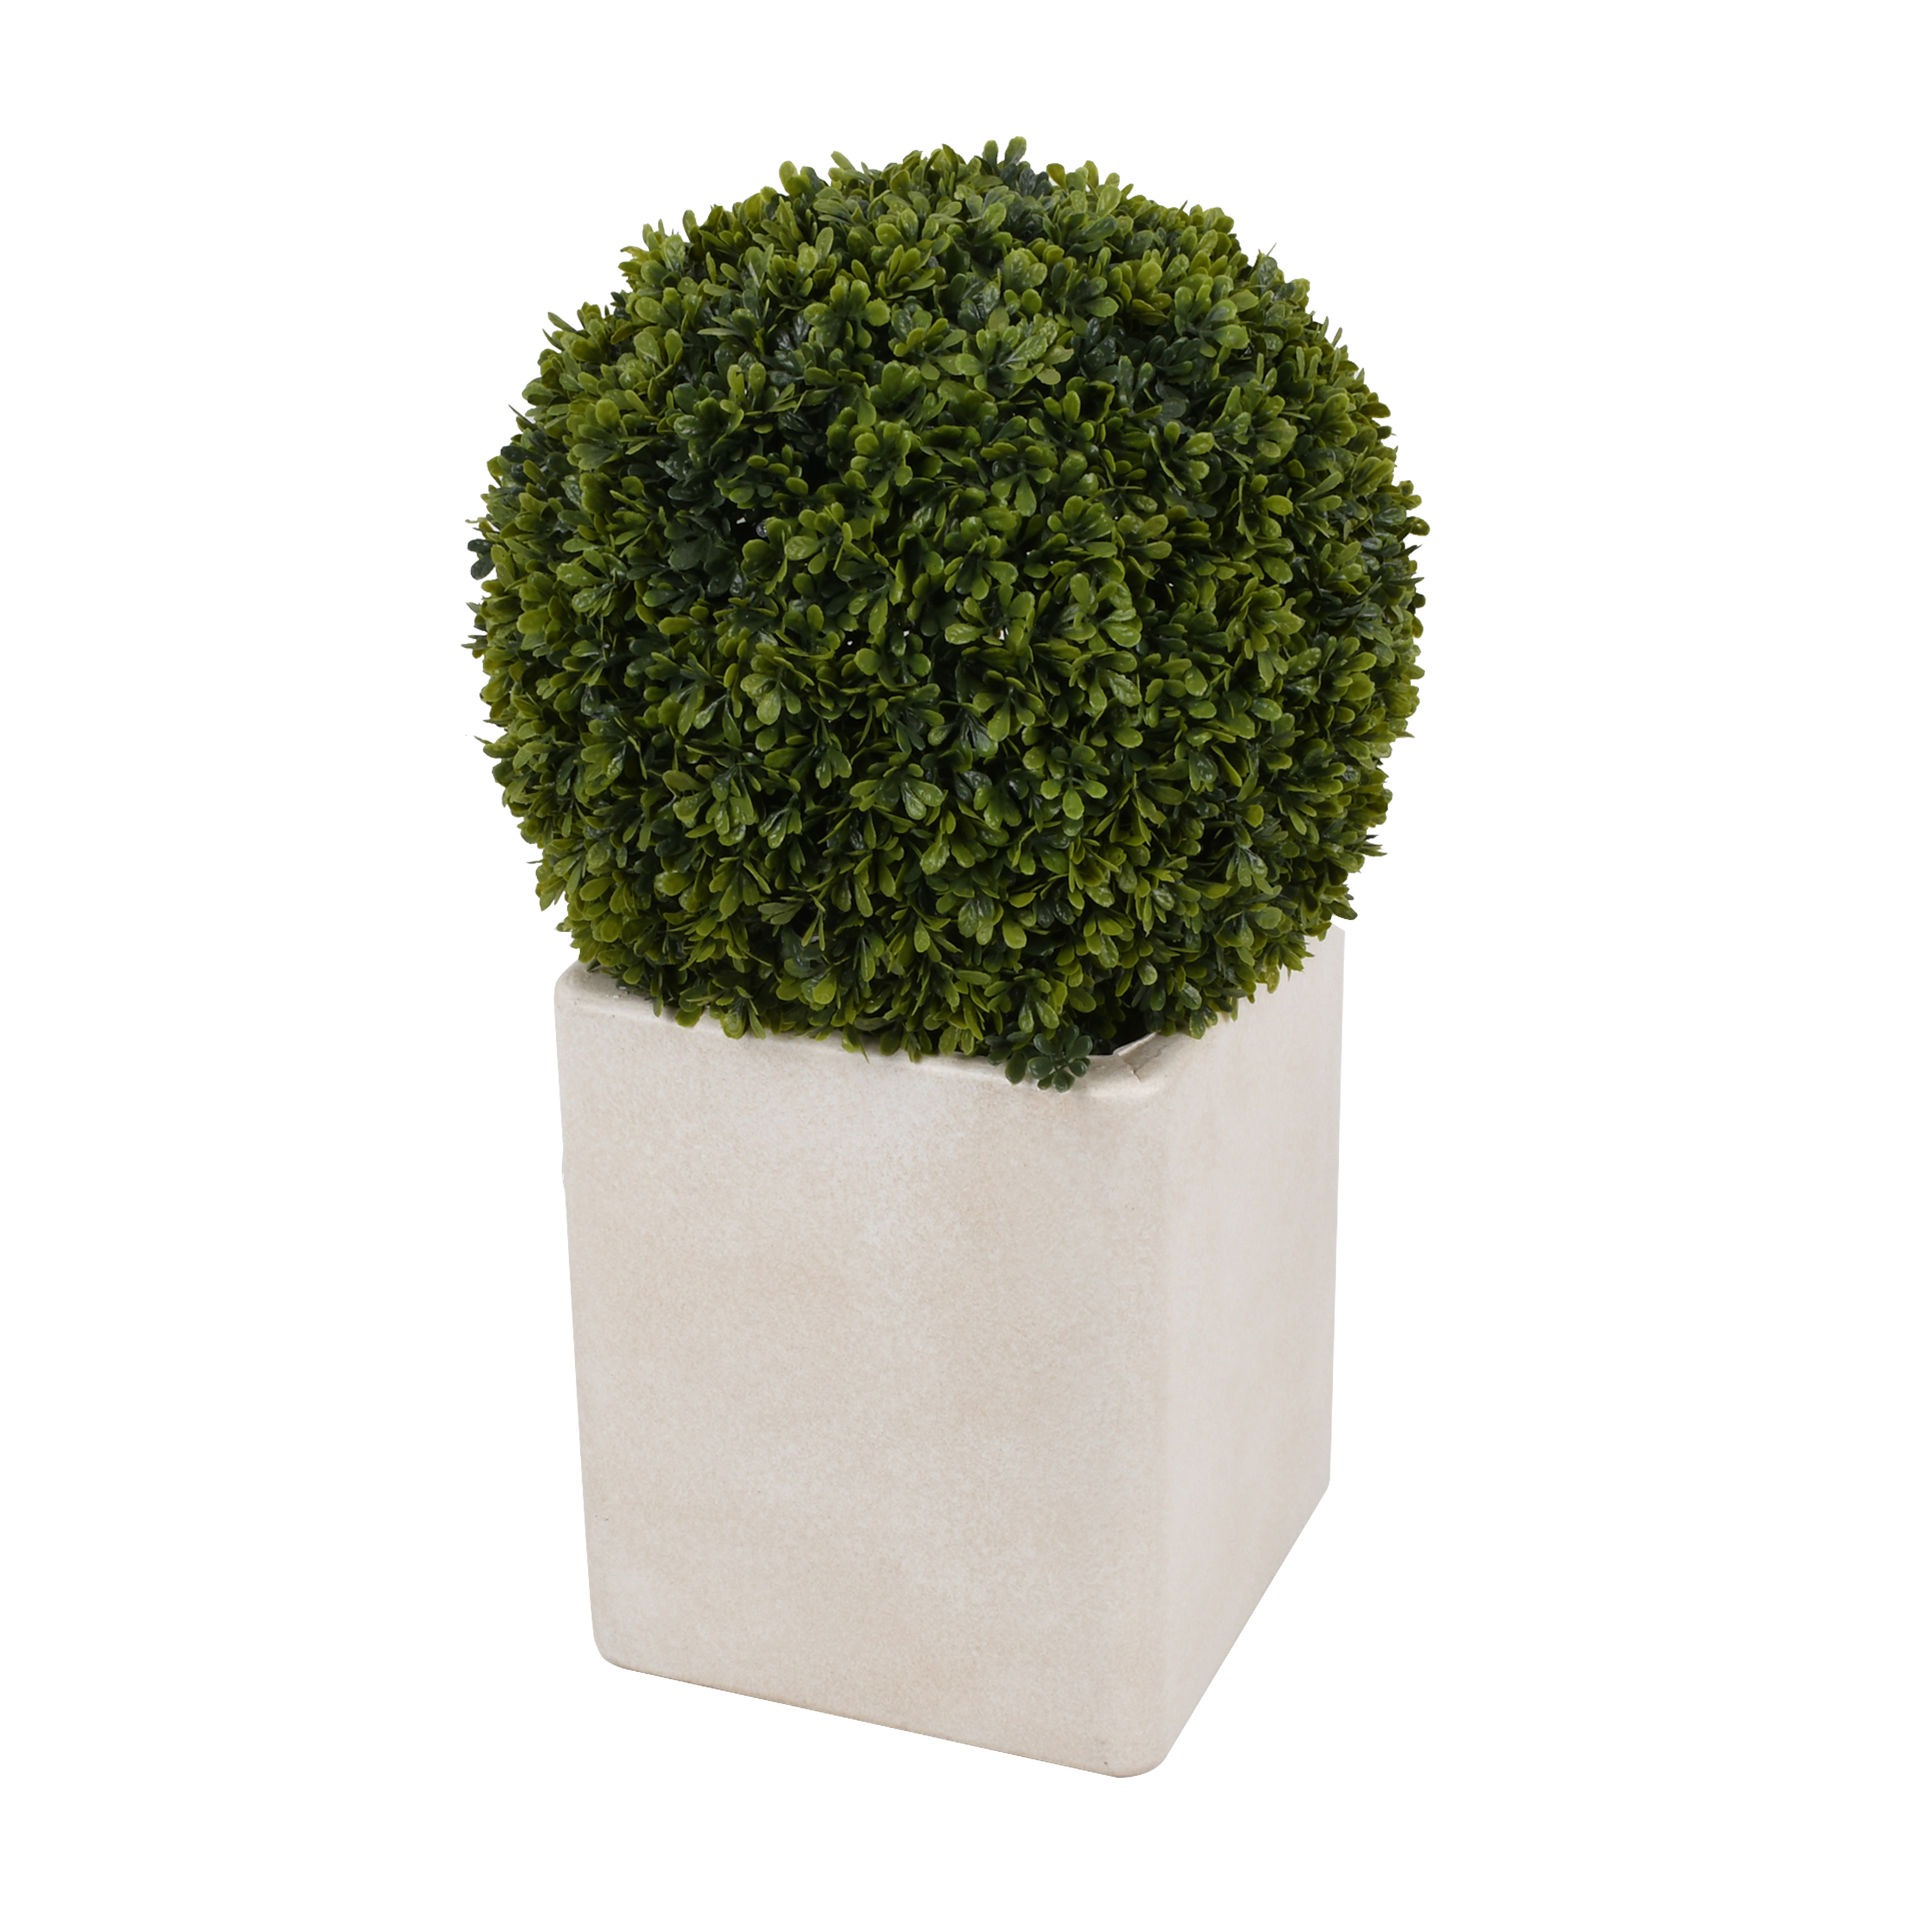 Better Homes & Gardens Outdoor Round 20"H Artificial Topiary Décor with Battery Powered Warm White LED Lights Eyebright - image 3 of 8